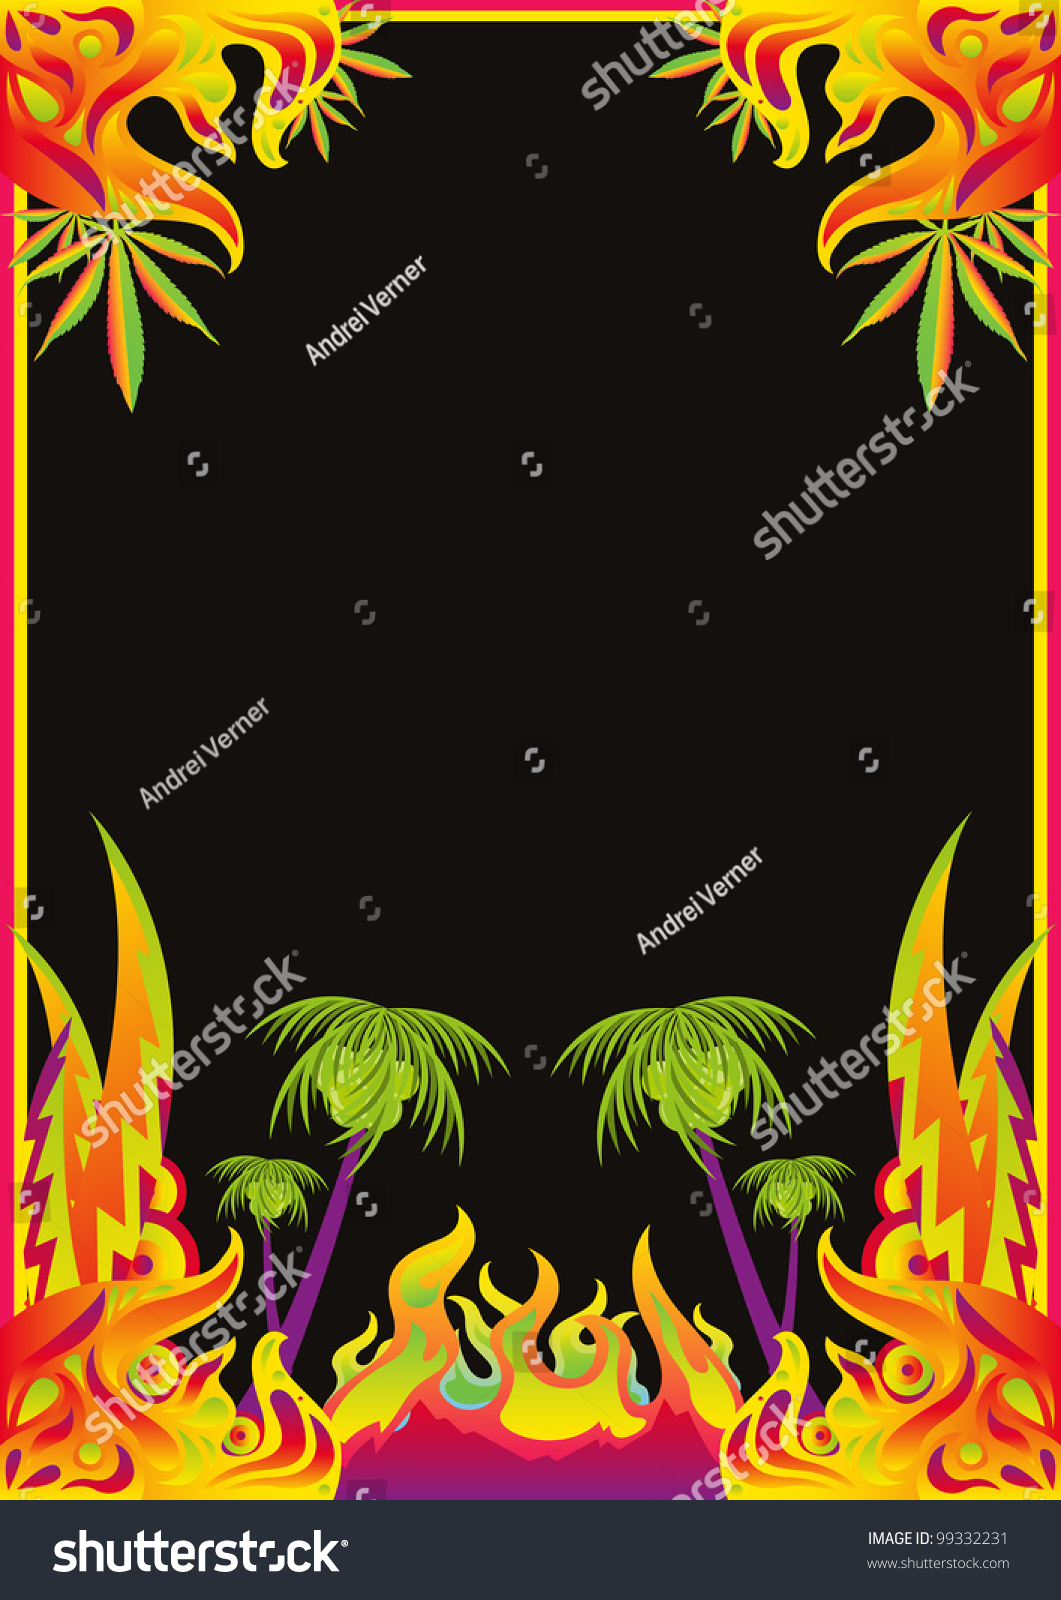 Psychedelic Music Party Flyer Background Colorful Stock Vector Royalty Free